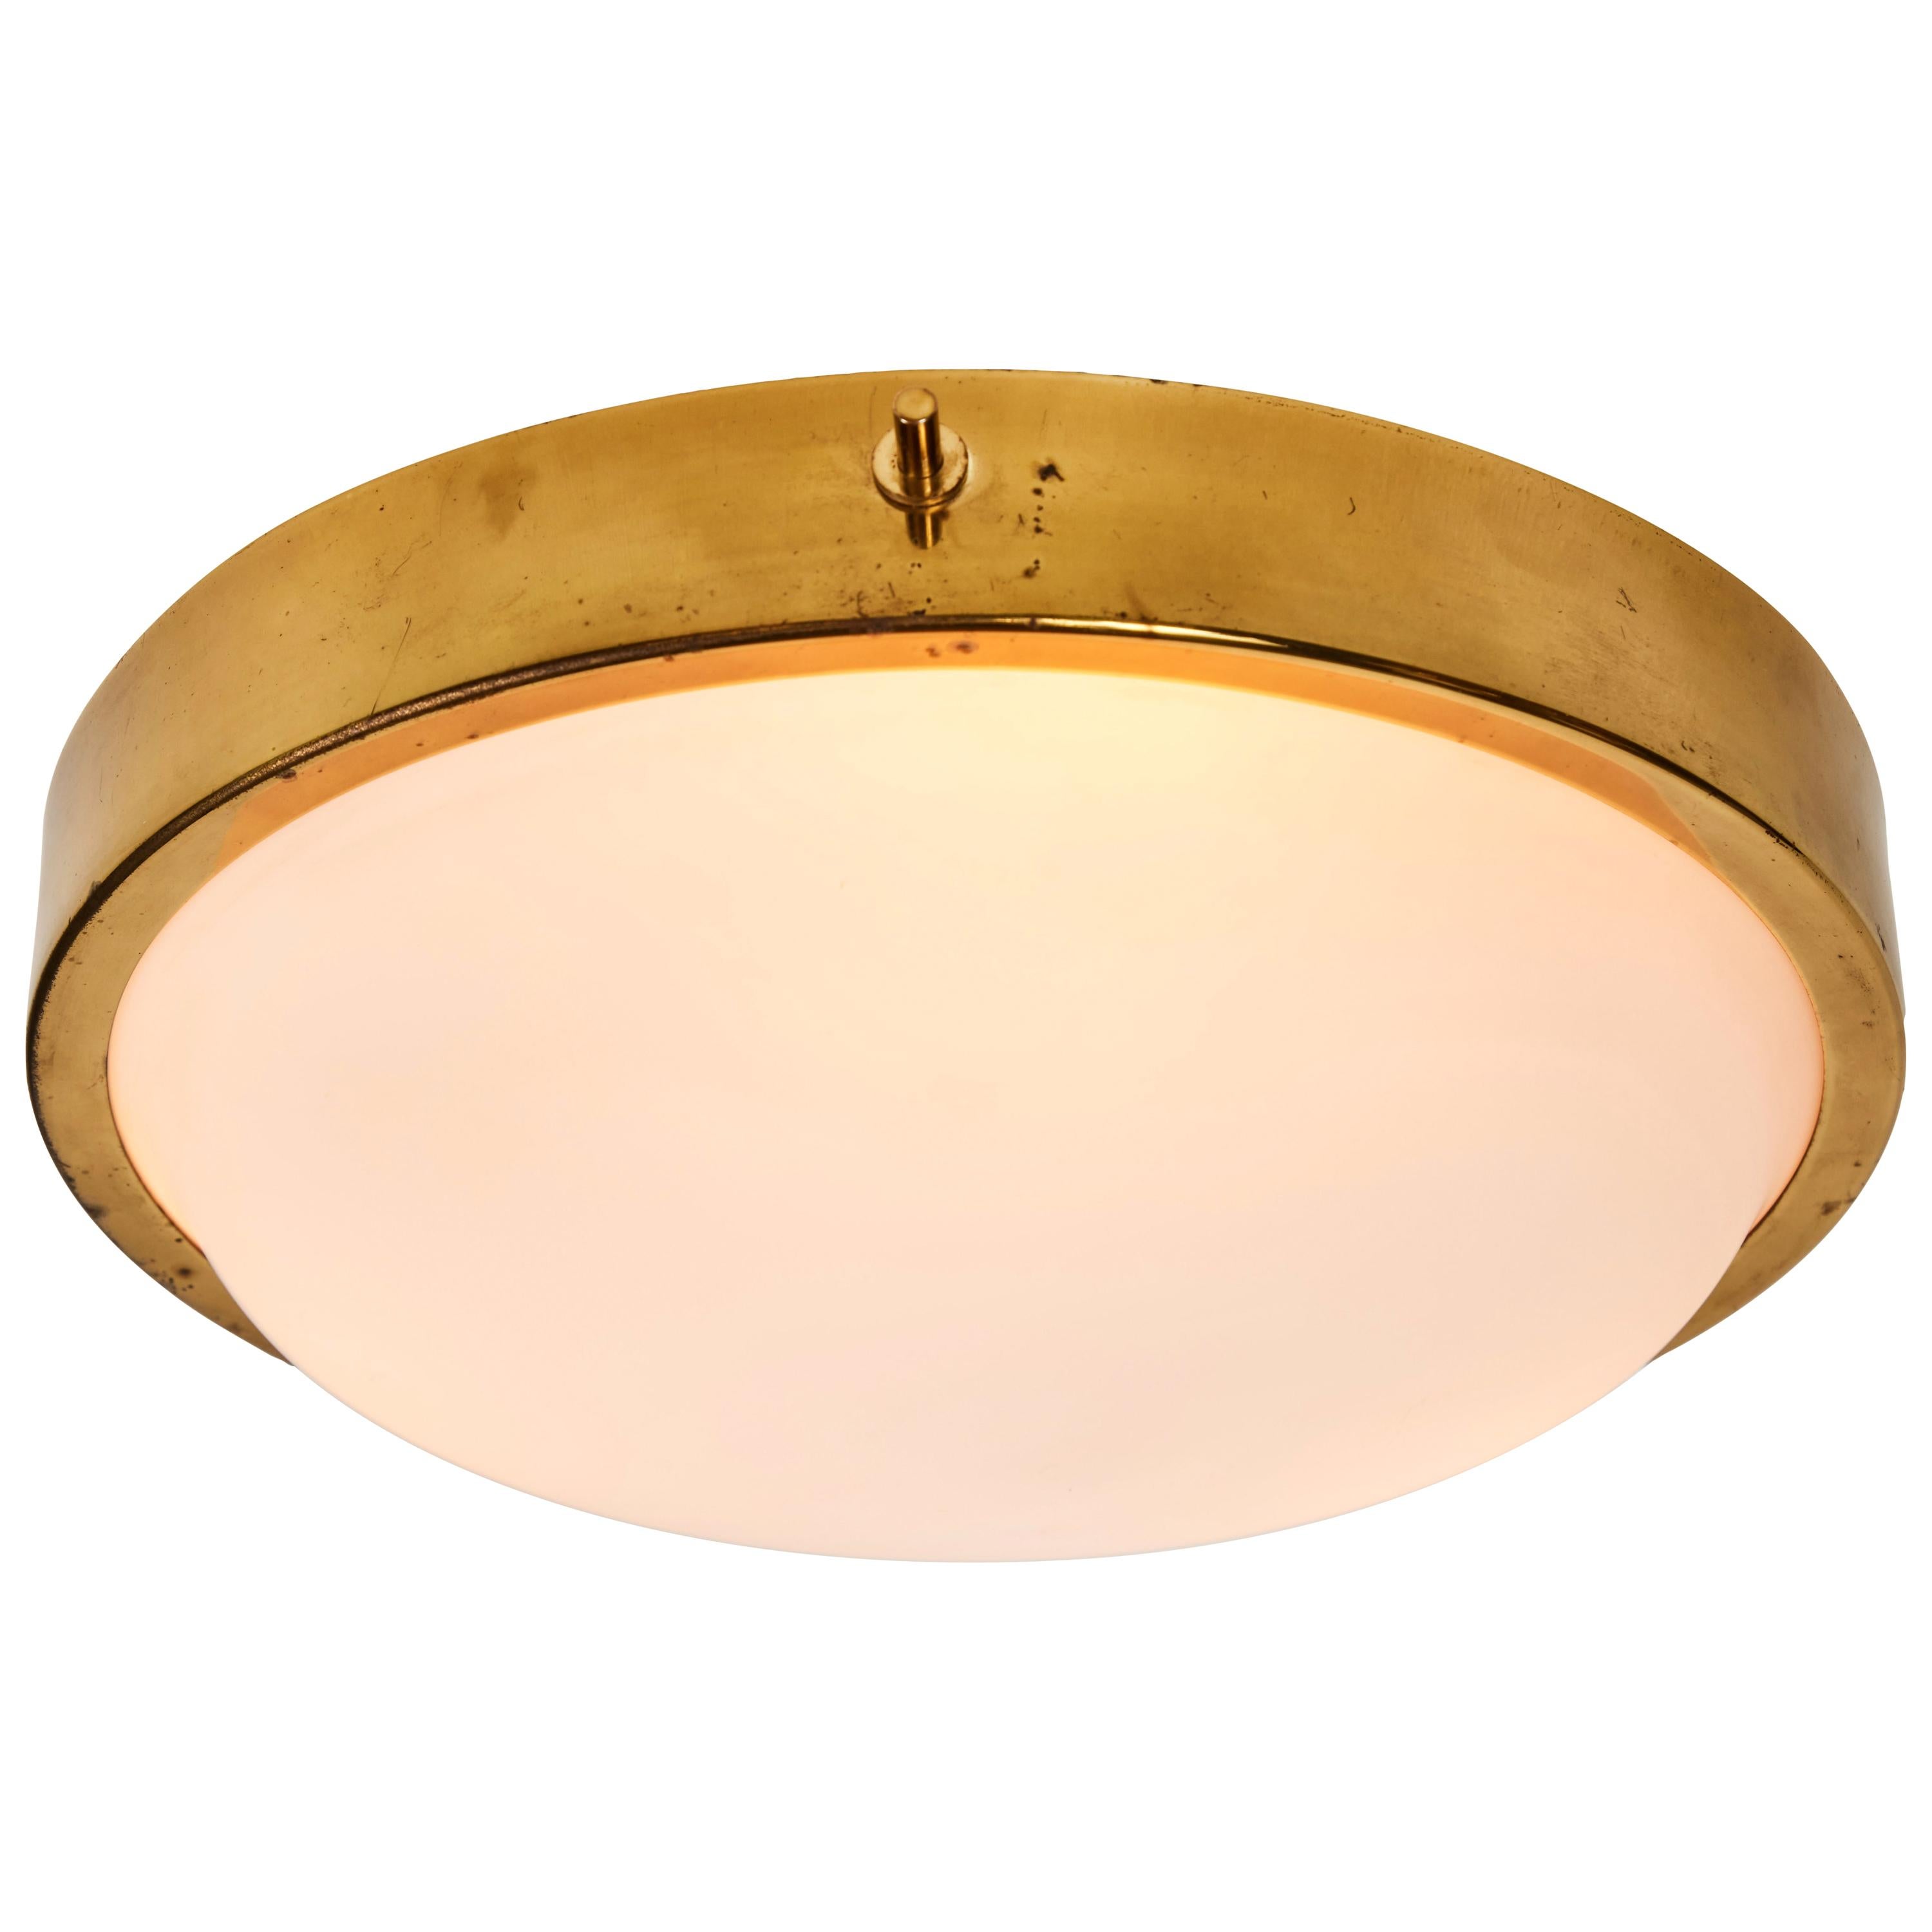 1950s Brass and Glass Ceiling Light by Oscar Torlasco for Lumi